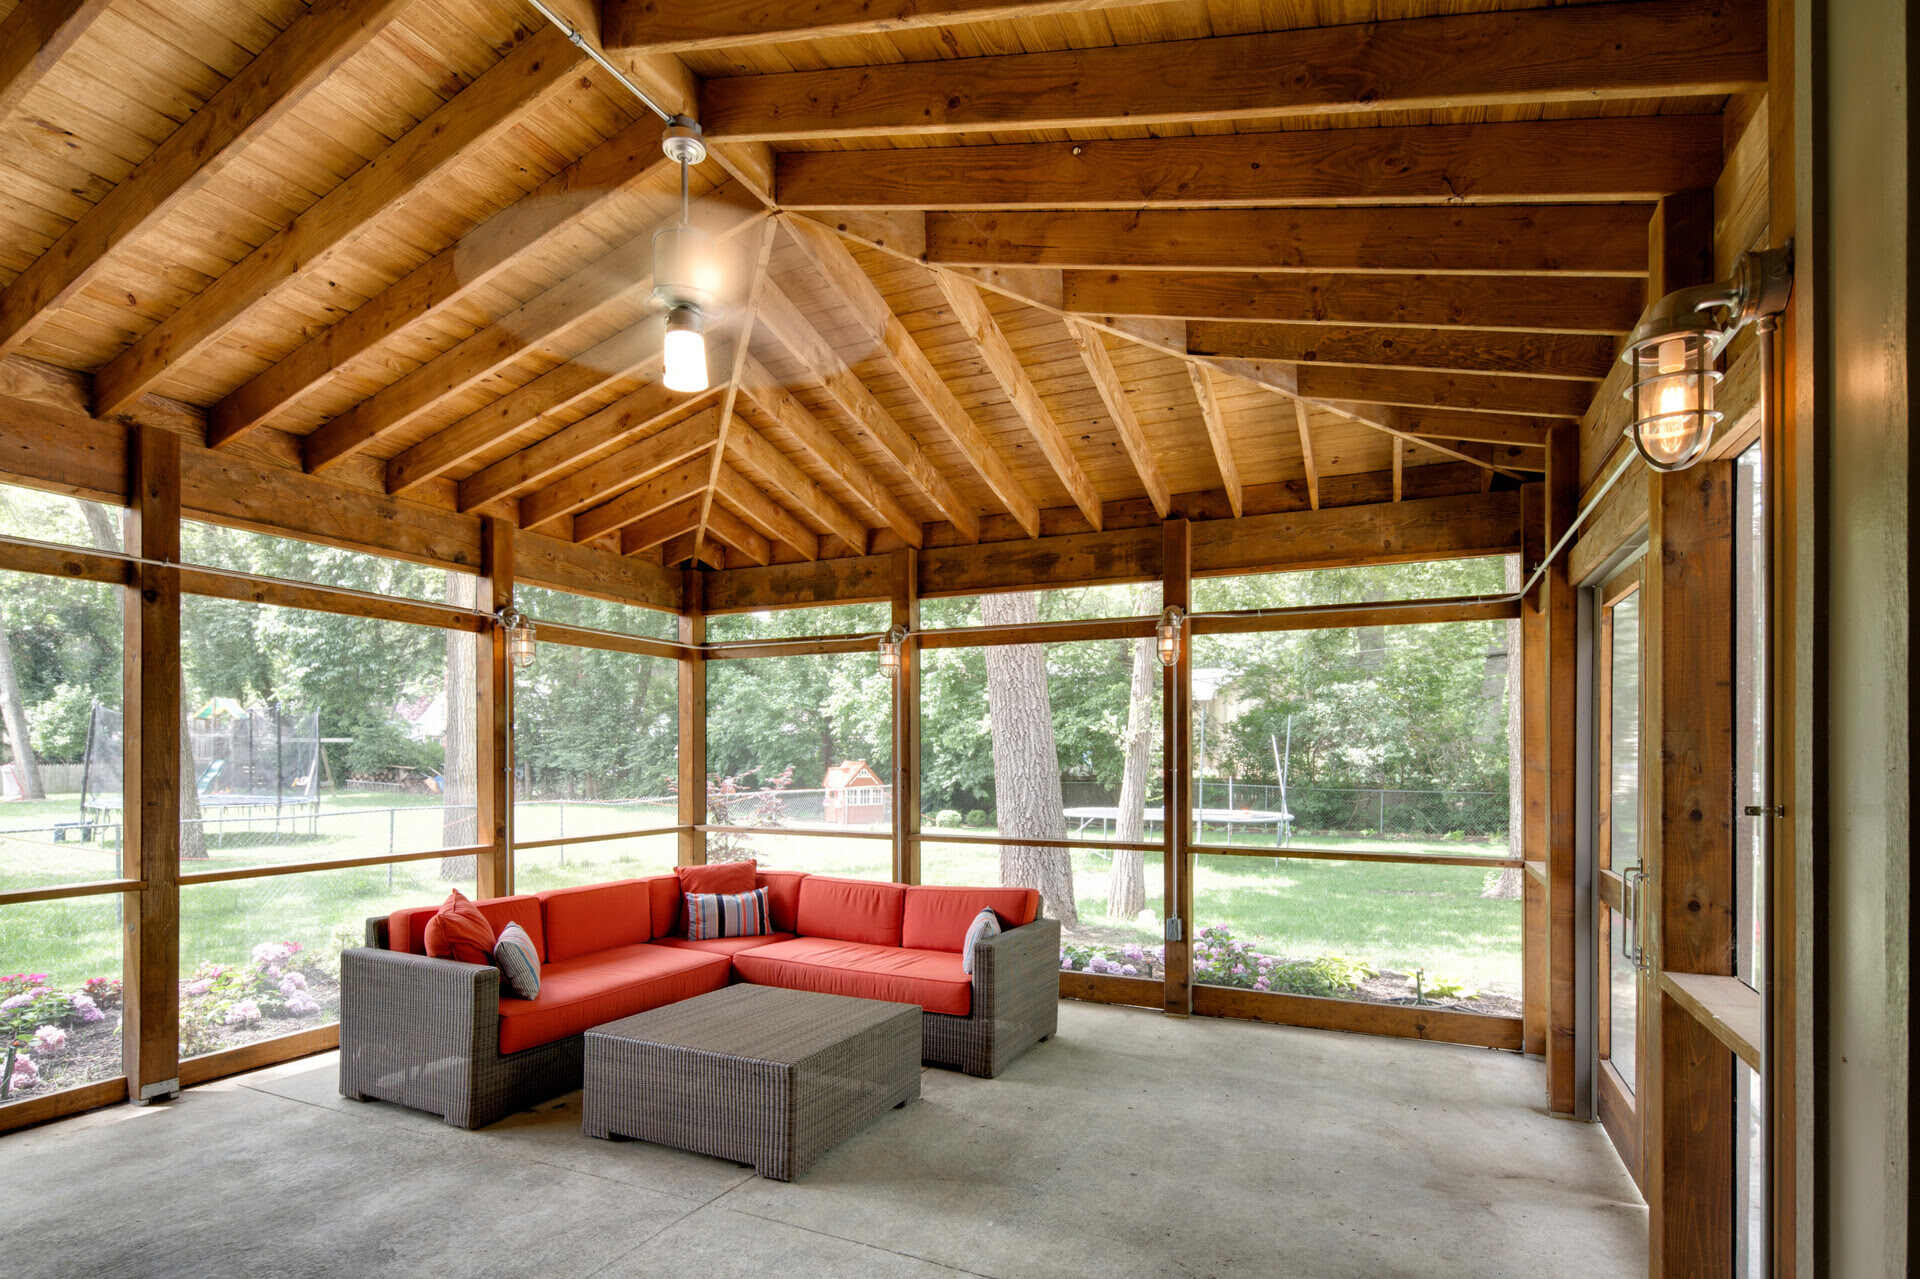 How To Build A Screened-In Porch On Concrete